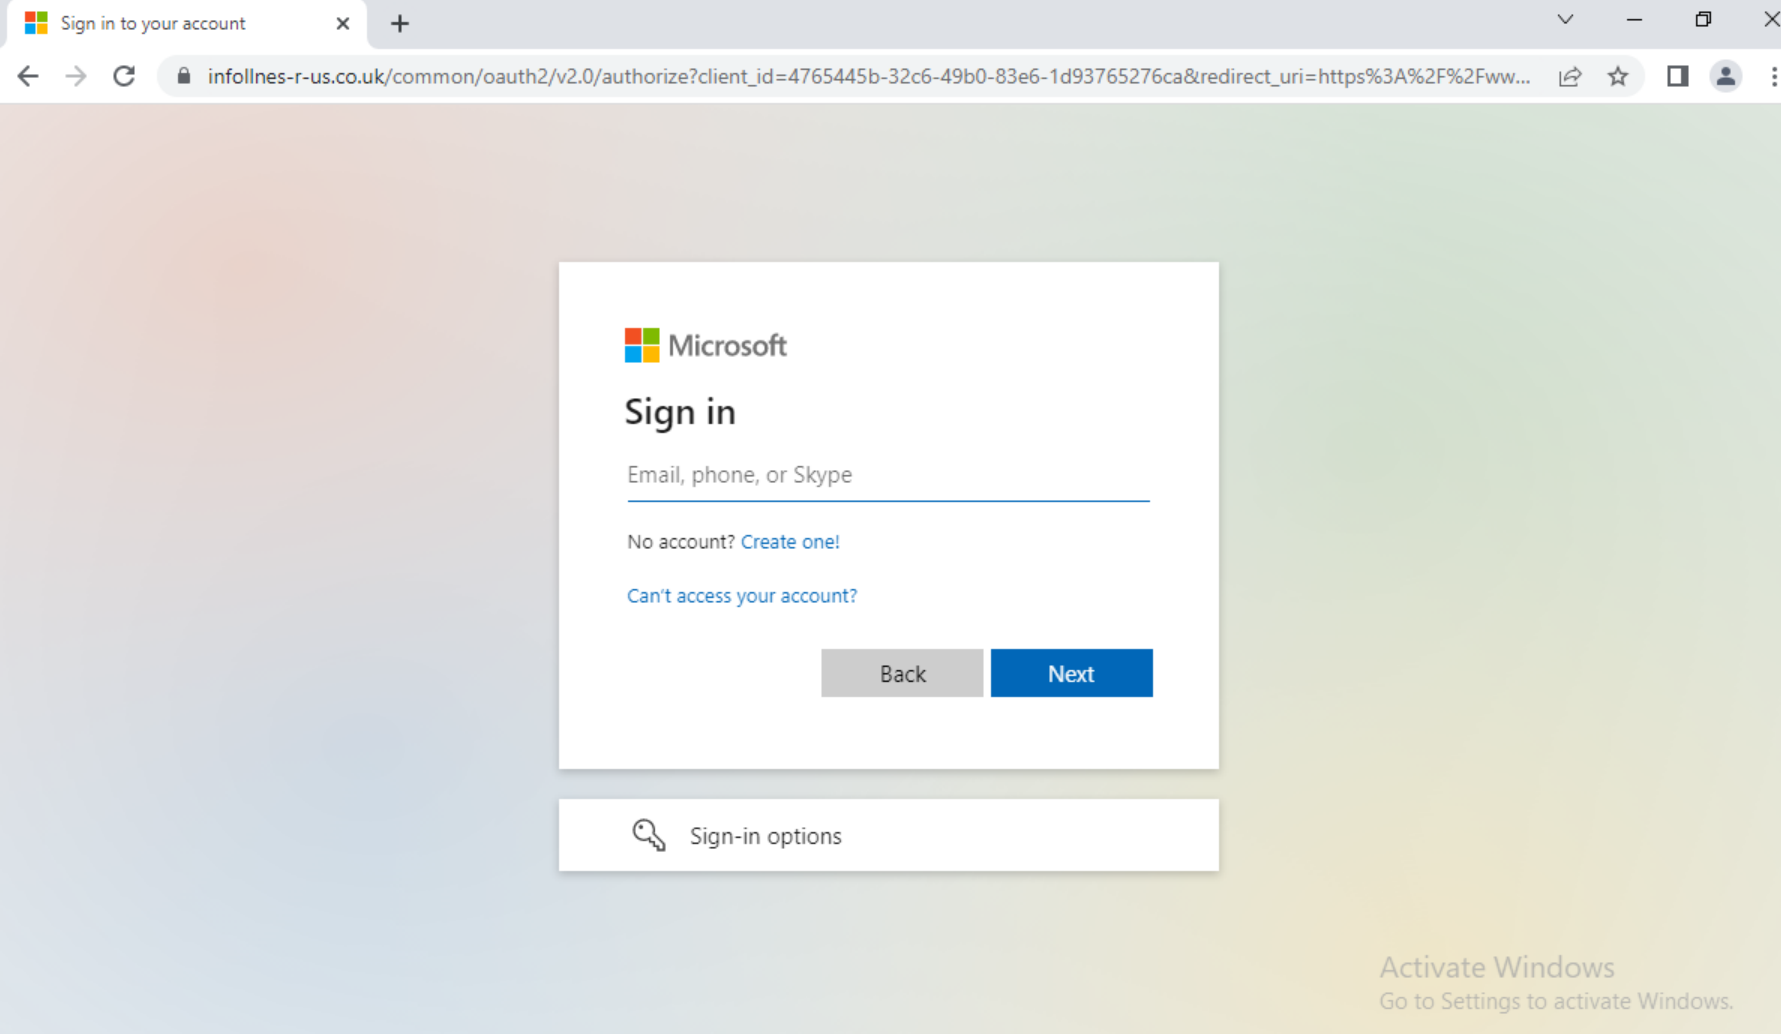 Image 8 is a screenshot of a phishing URL that targeted Microsoft. It shows the Microsoft login page. 